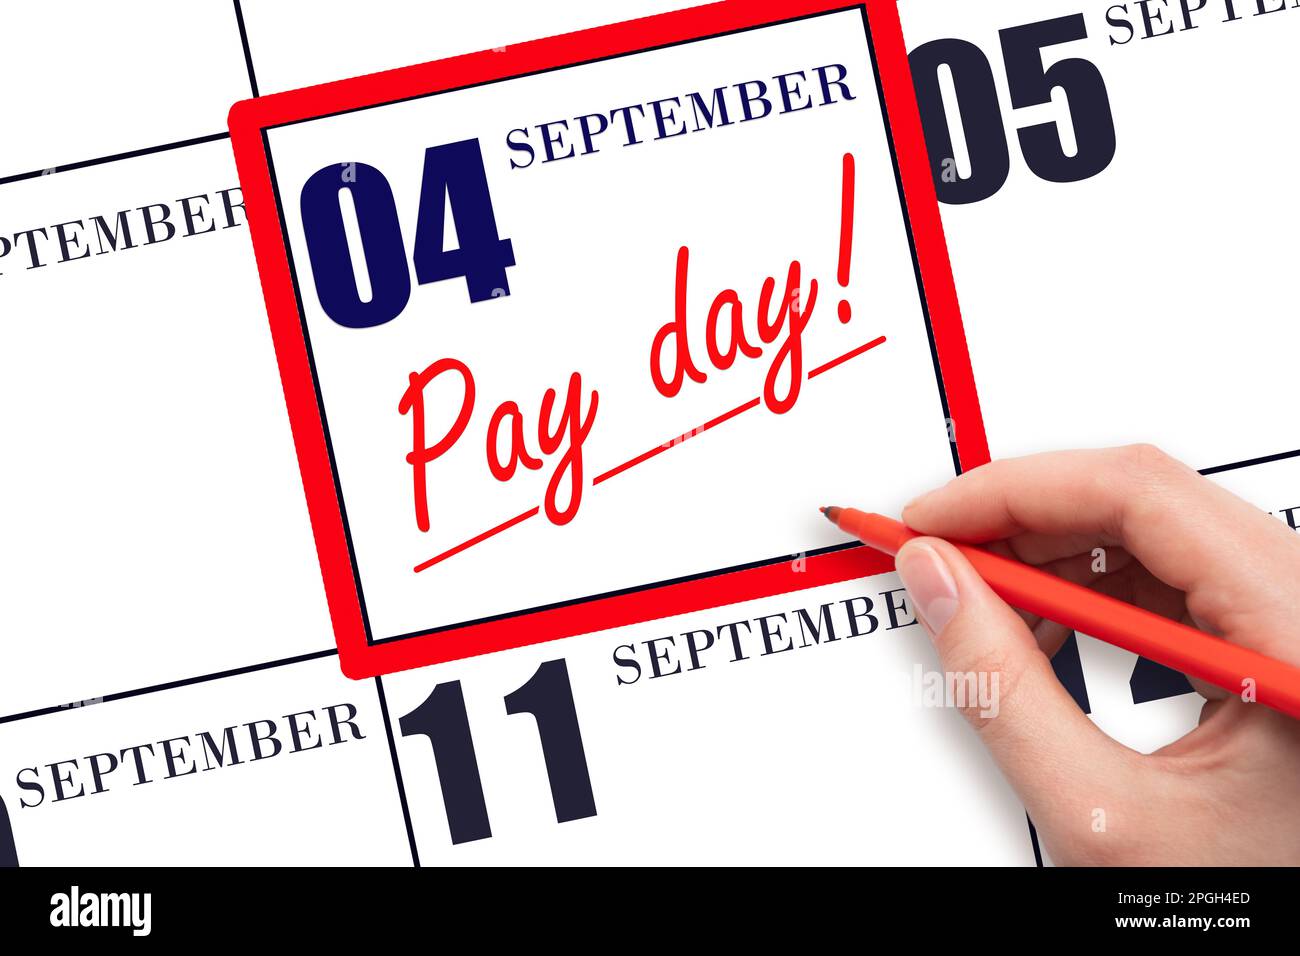 4th day of September. Hand writing text PAY DATE on calendar date September 4 and underline it. Payment due date. Reminder concept of payment. Autumn Stock Photo